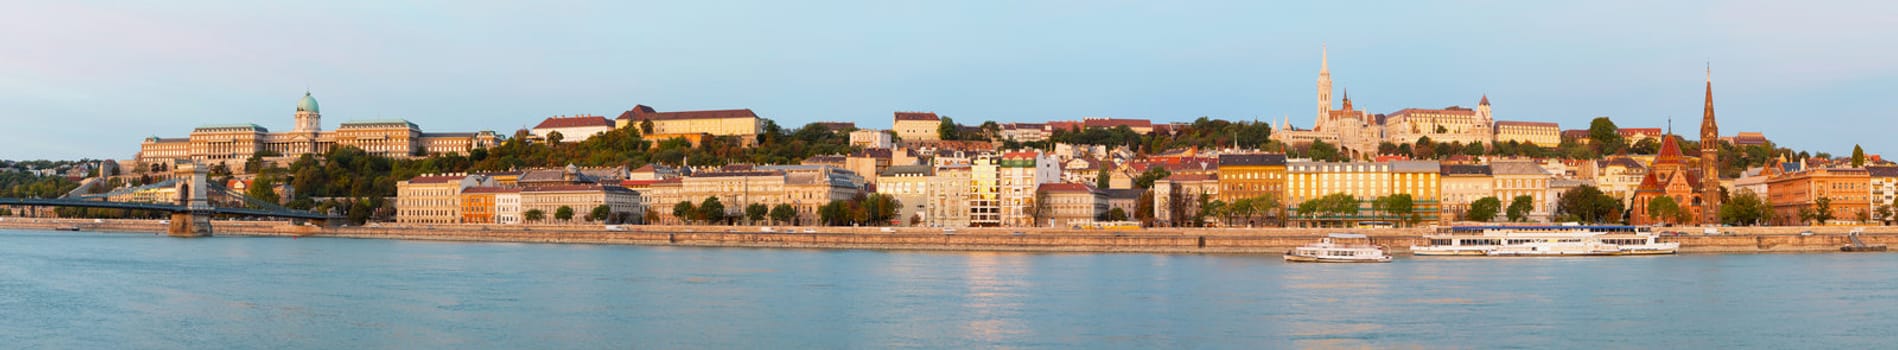 Old Budapest overview as seen from Danube river bank early in the morning